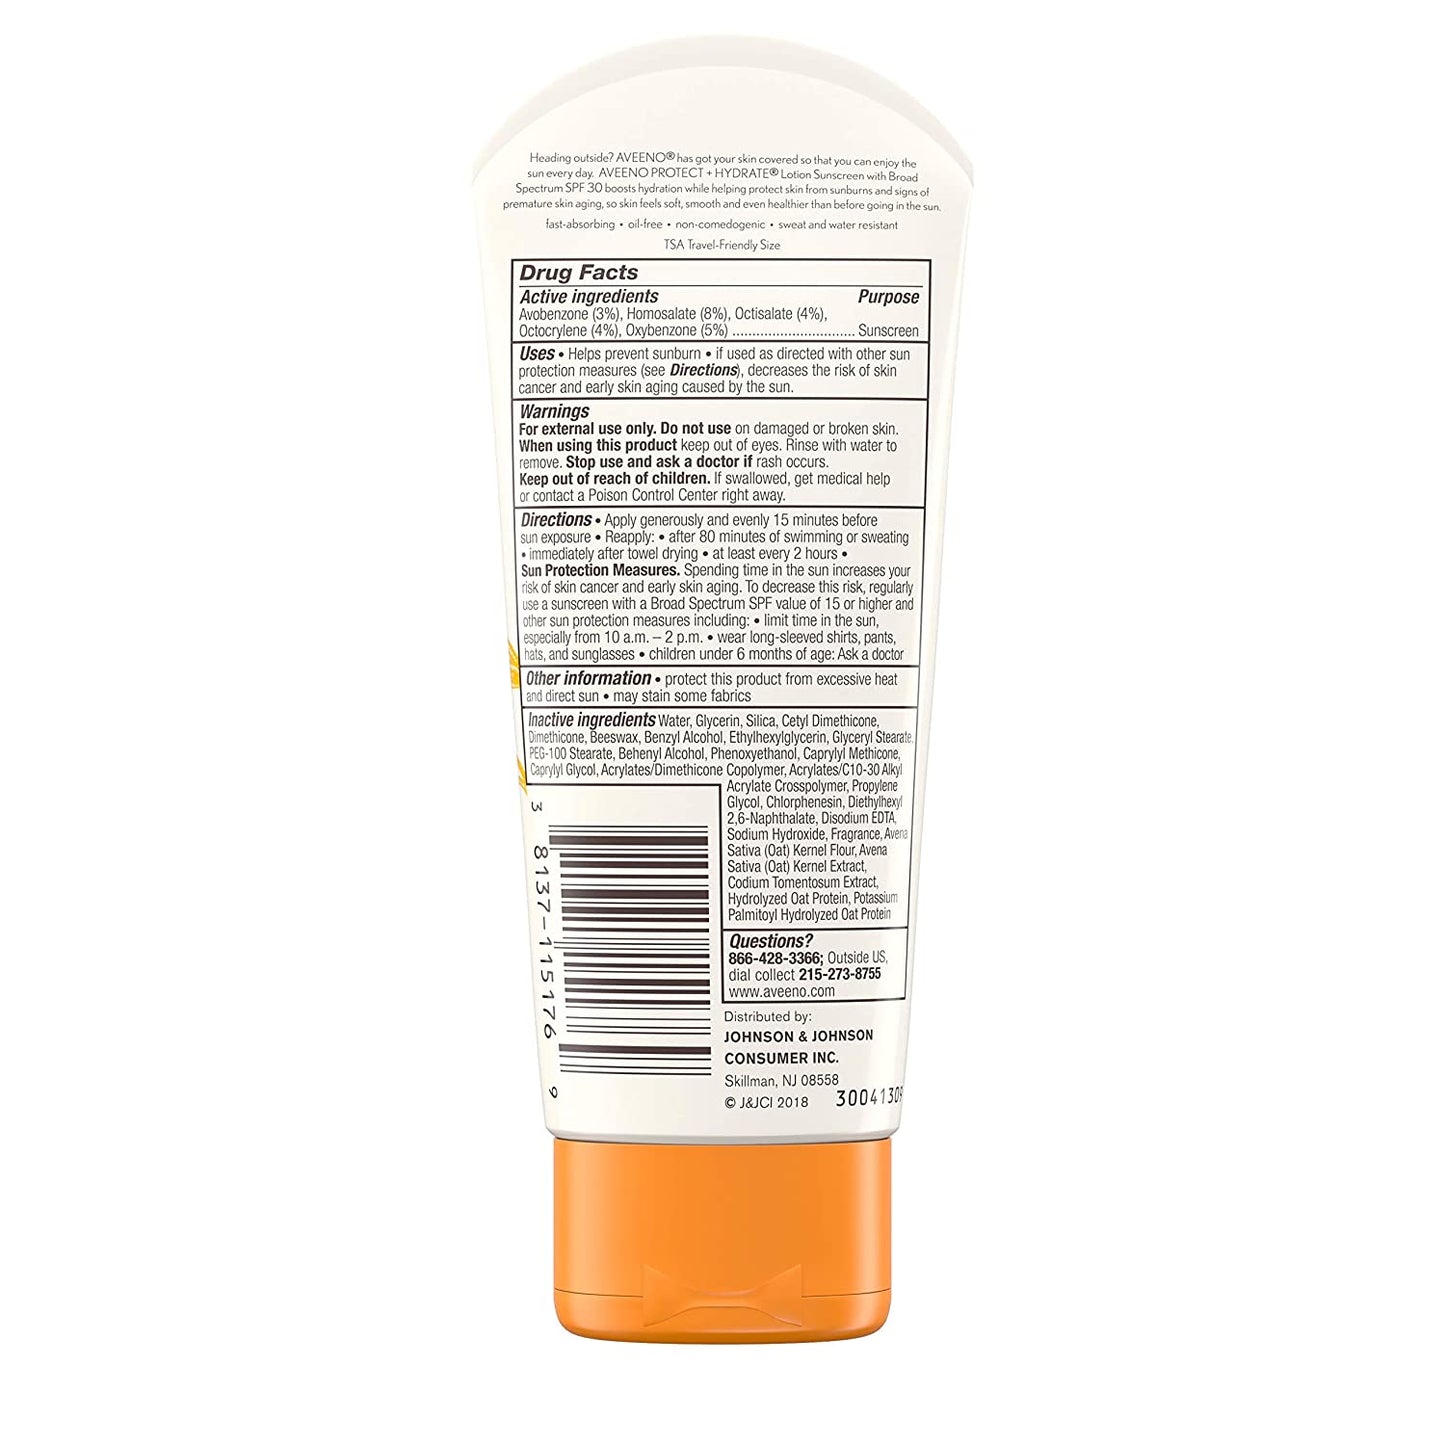 Aveeno Protect + Hydrate Face-Moisturizing Sunscreen Lotion with Broad Spectrum SPF 30, 3 oz